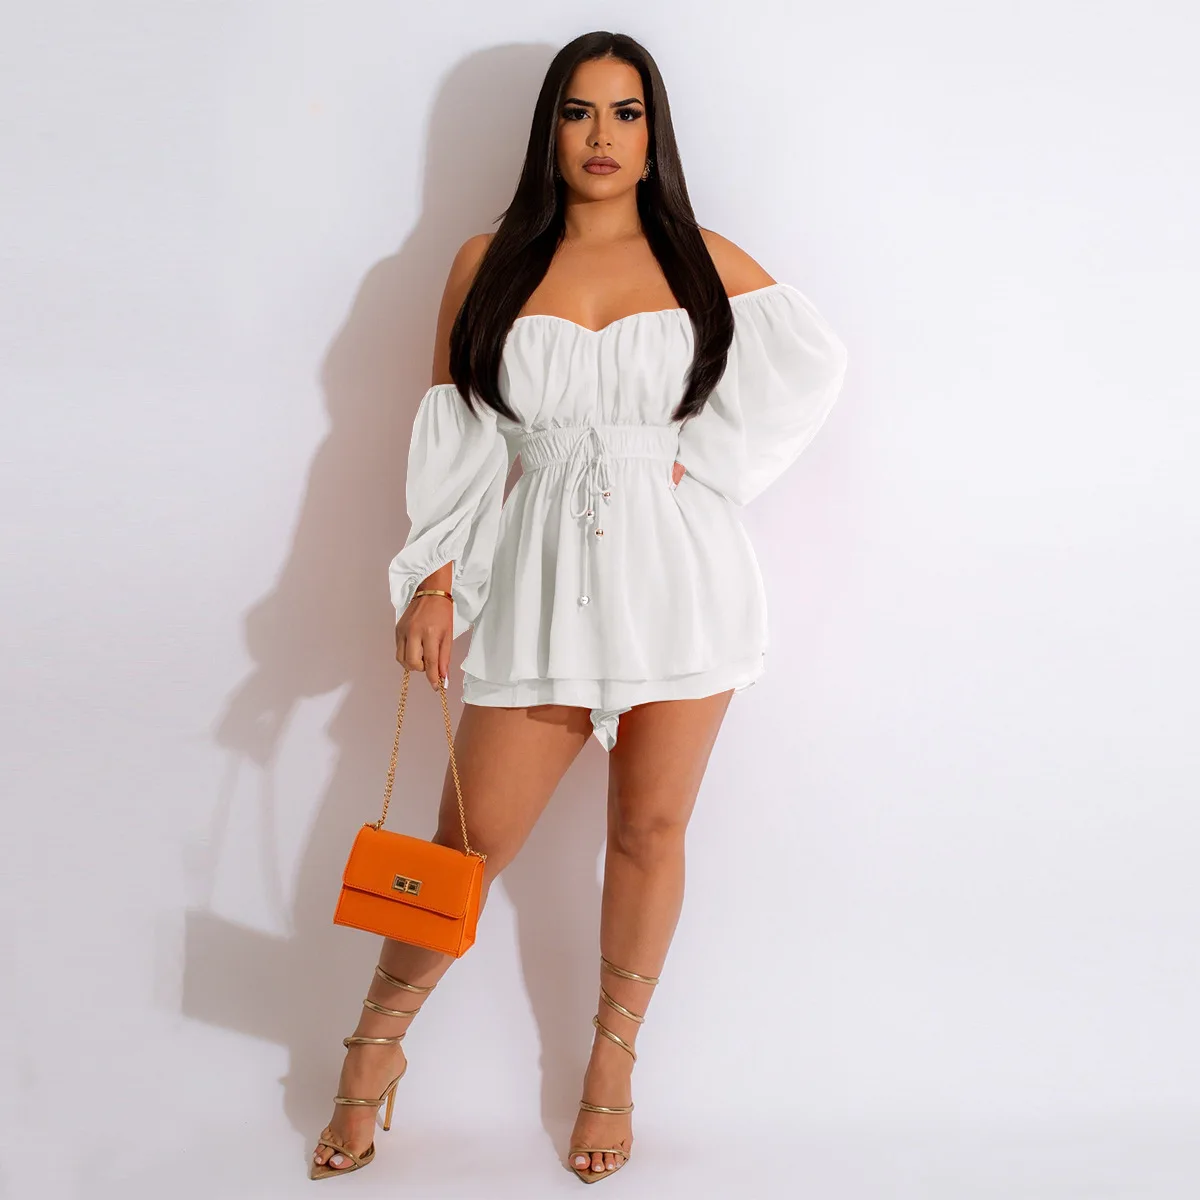 

Summer Off Shoulder Chiffon Playsuit Women Jumpsuit Shorts Casual Vacation Puff Sleeves Long Sleeve Waist Drawstring Rompers